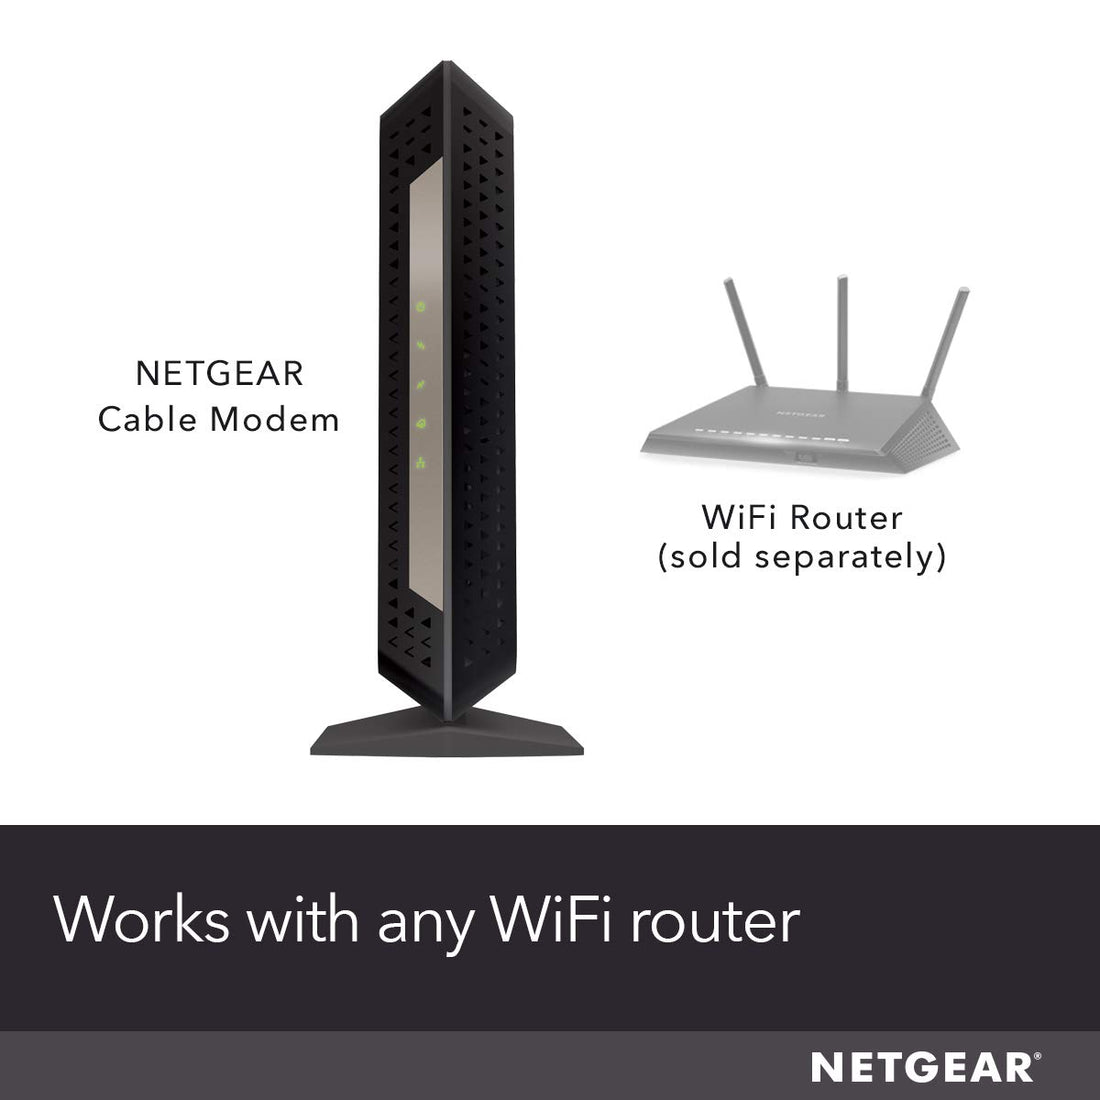 NETGEAR DOCSIS 3.1 Gigabit Cable Modem. Max download speeds of 1.0 Gbps, For XFINITY by Comcast and Cox. Compatible with Gig Speed from Xfinity (CM1000 1AZNAS)